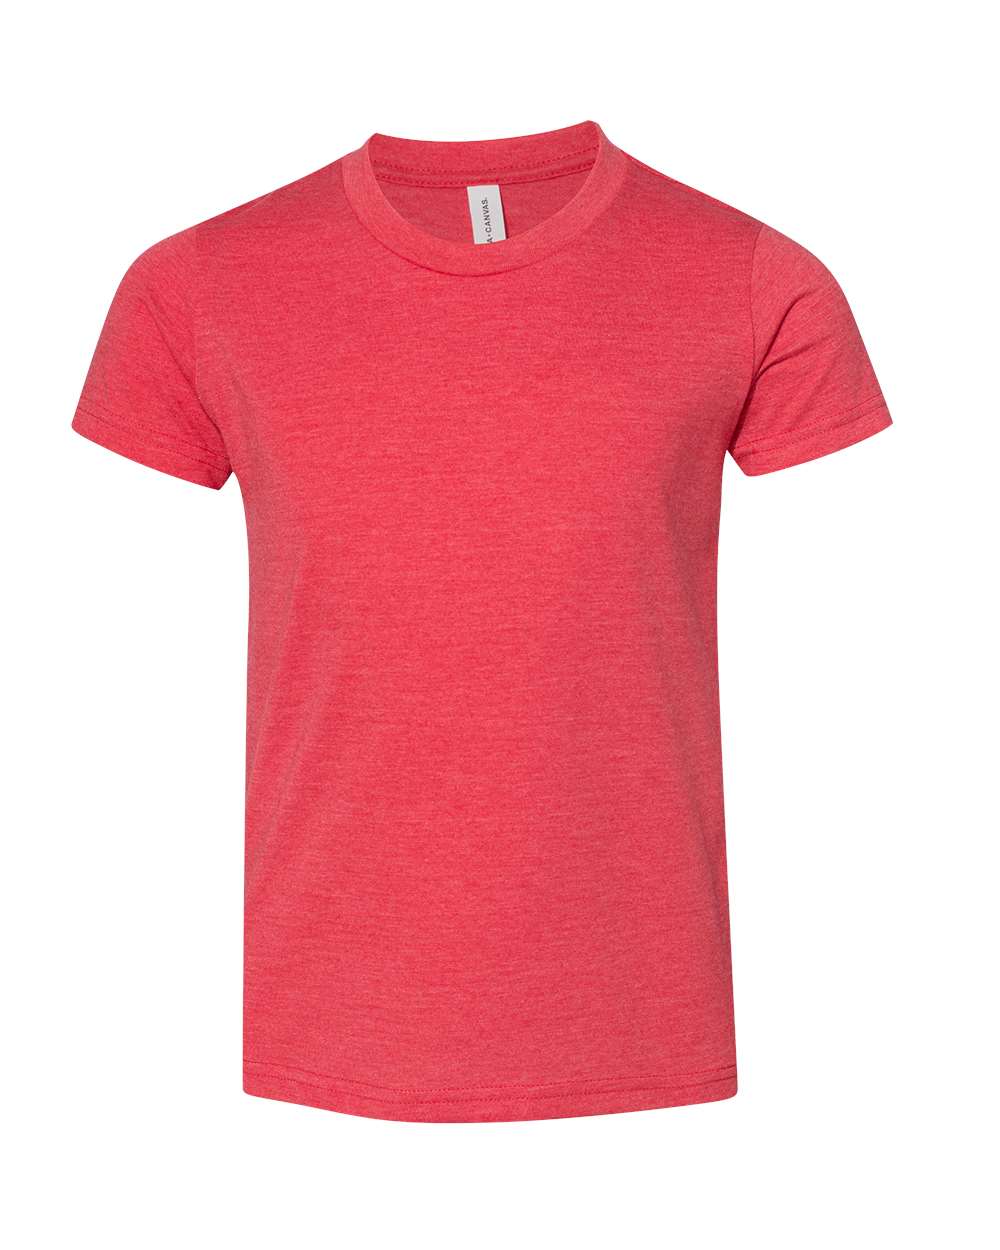 BELLA + CANVAS Youth CVC Unisex Jersey Tee 3001YCVC #color_Heather Red